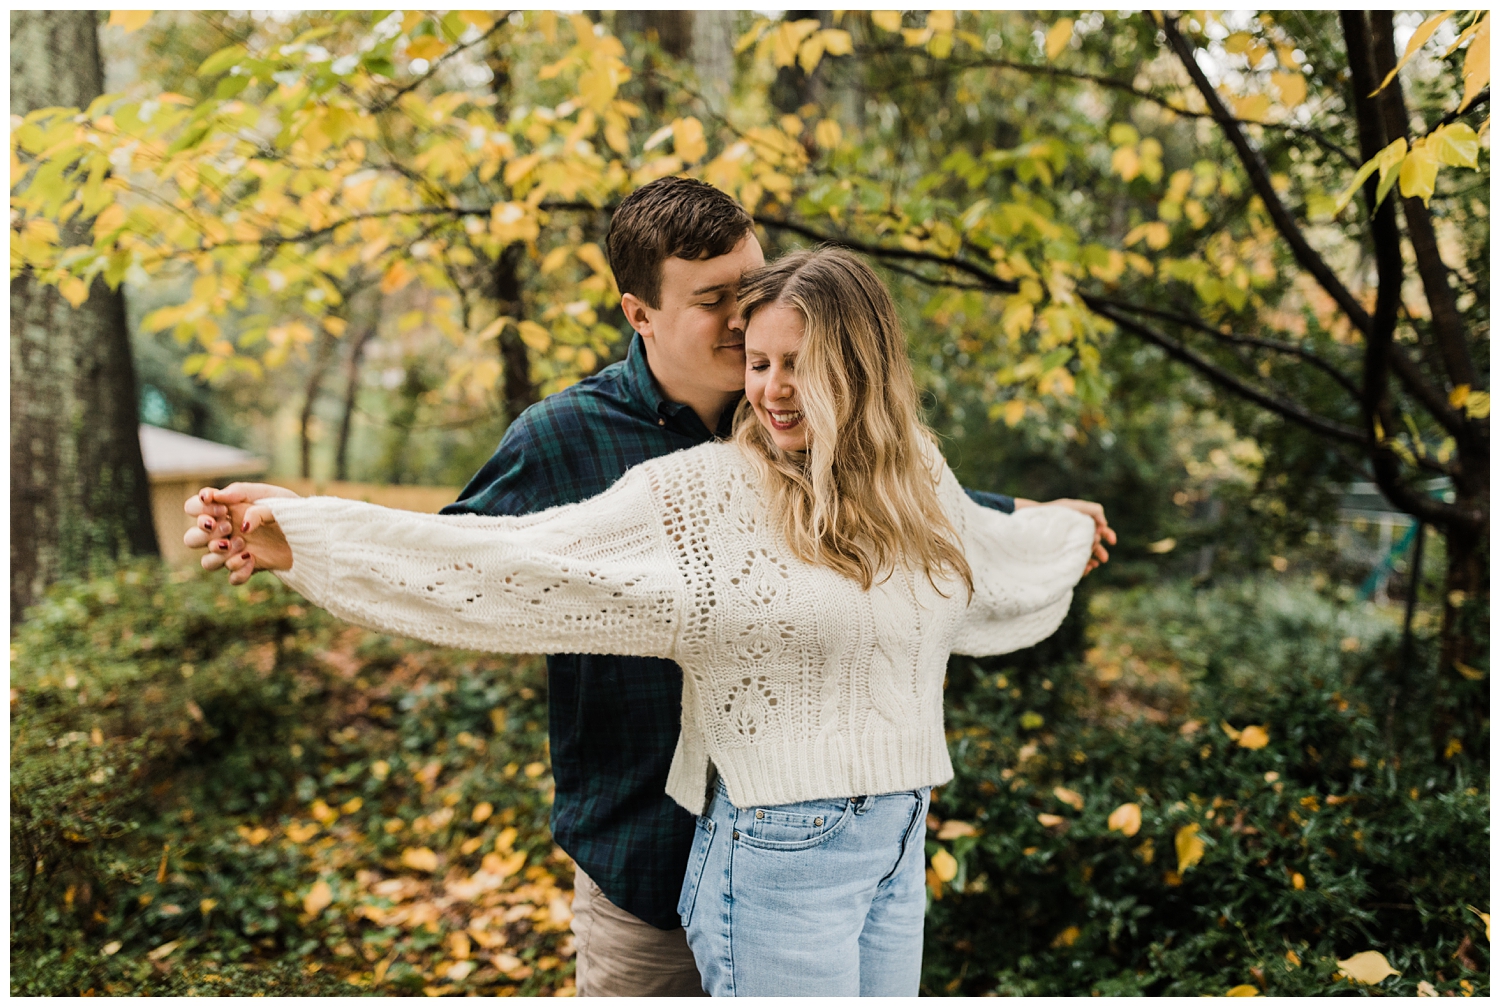 rainy day engagement session in marietta, georgia with cute couple walking and playing under a colorful yellow tree